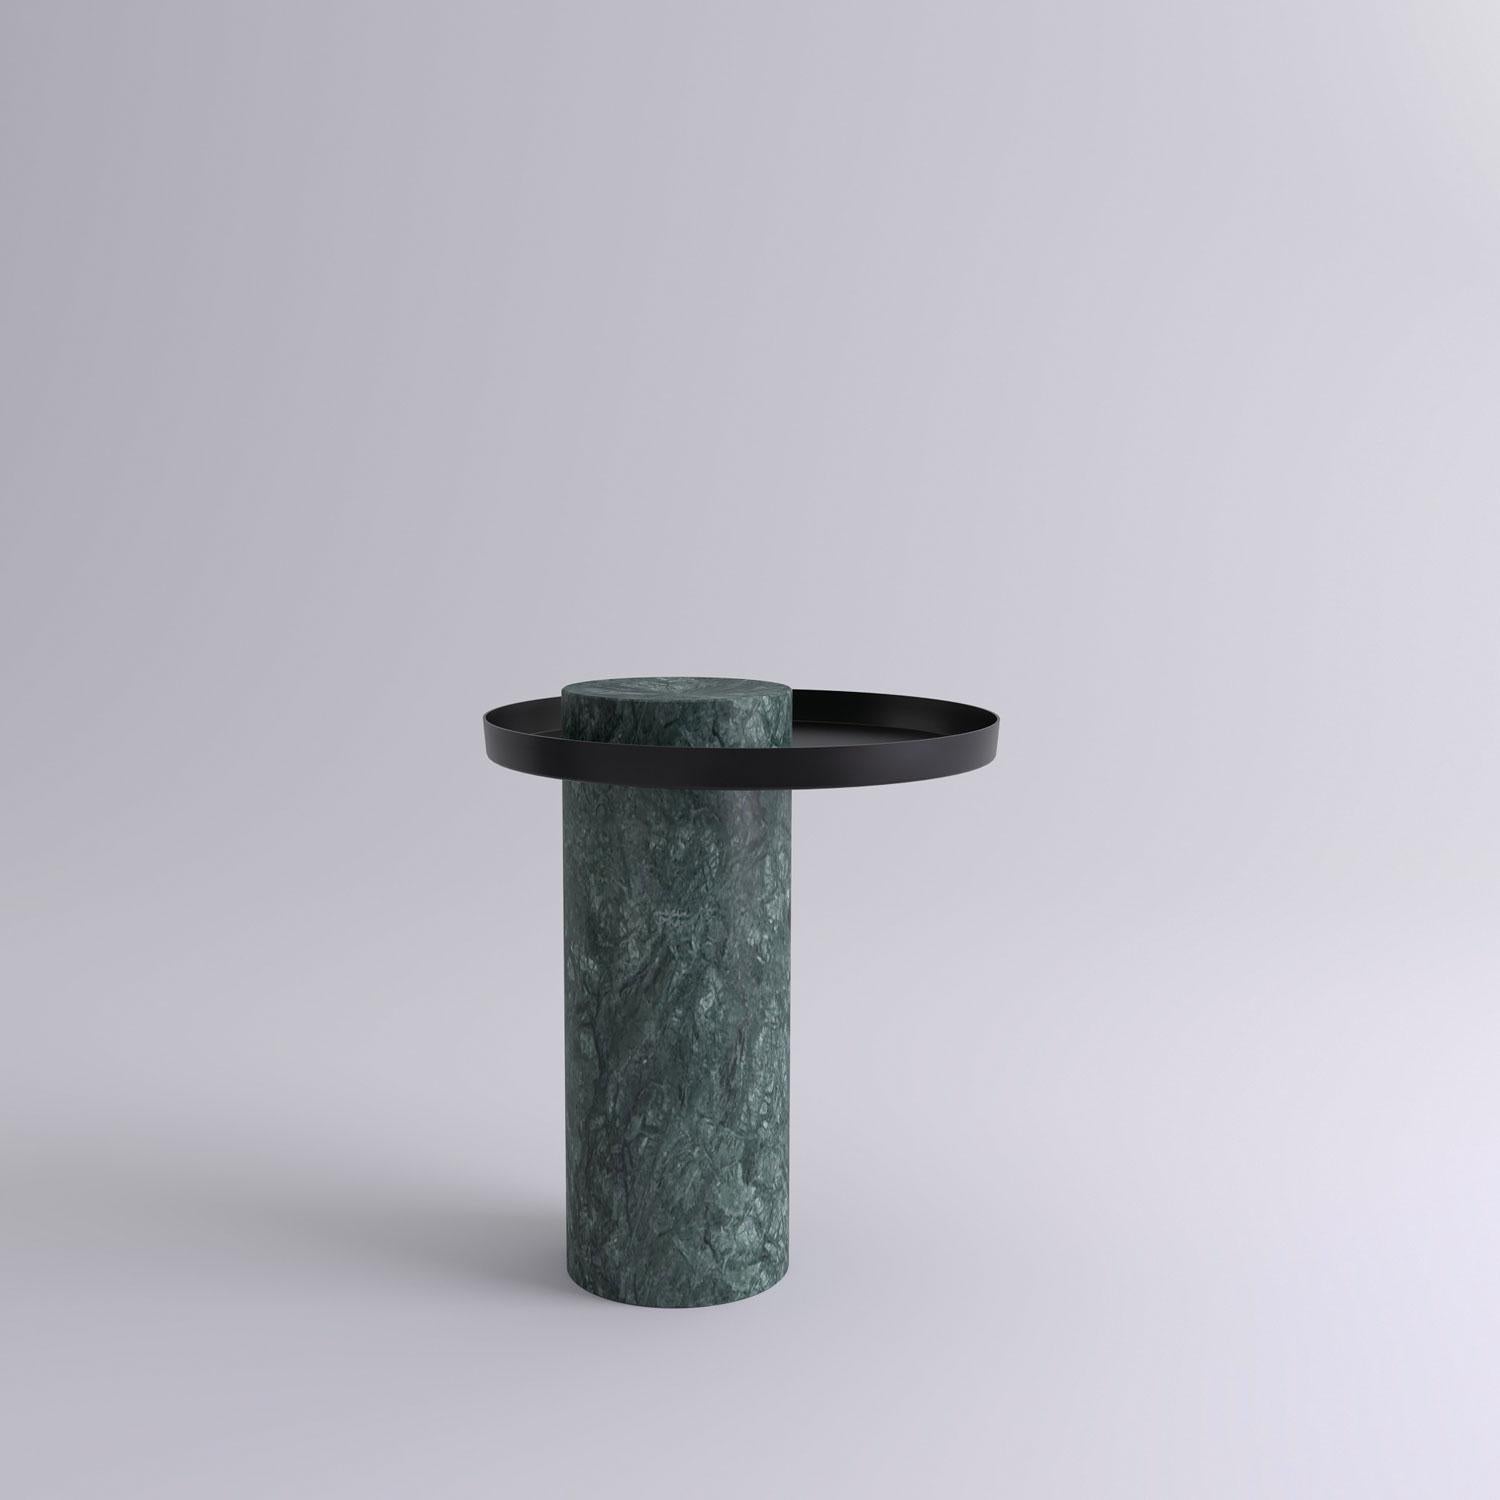 Medium indian green contemporary guéridon, Sebastian Herkner
Dimensions: D 40 x H 46 cm
Materials: Indian Green marble, black metal tray

The salute table exists in 3 sizes, 4 different marble stones for the column and 5 different finishes for